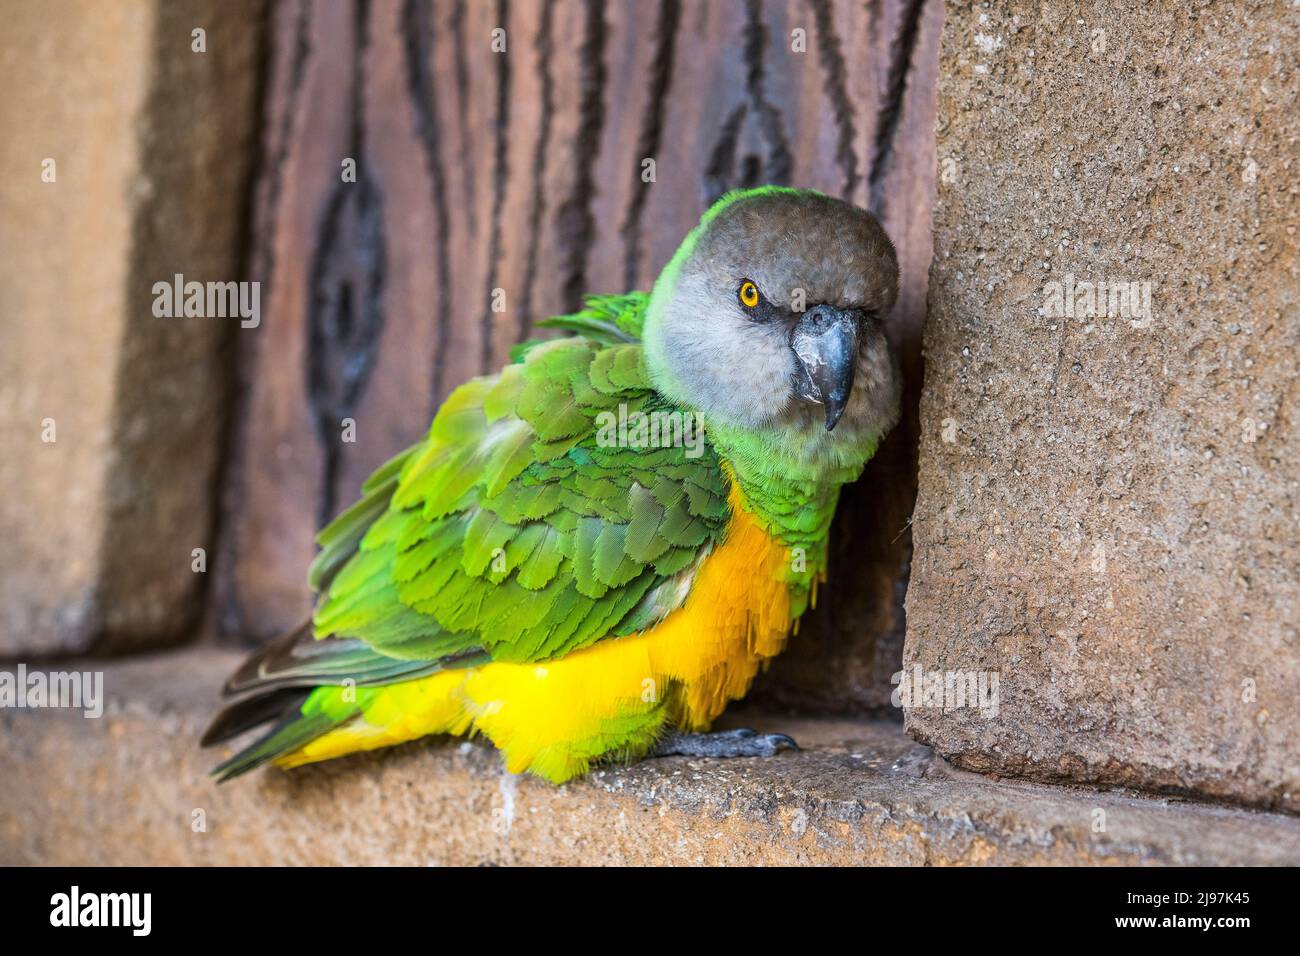 The Senegal parrot (Poicephalus senegalus) is a parrot which is a resident breeder across a wide range of west Africa. Stock Photo